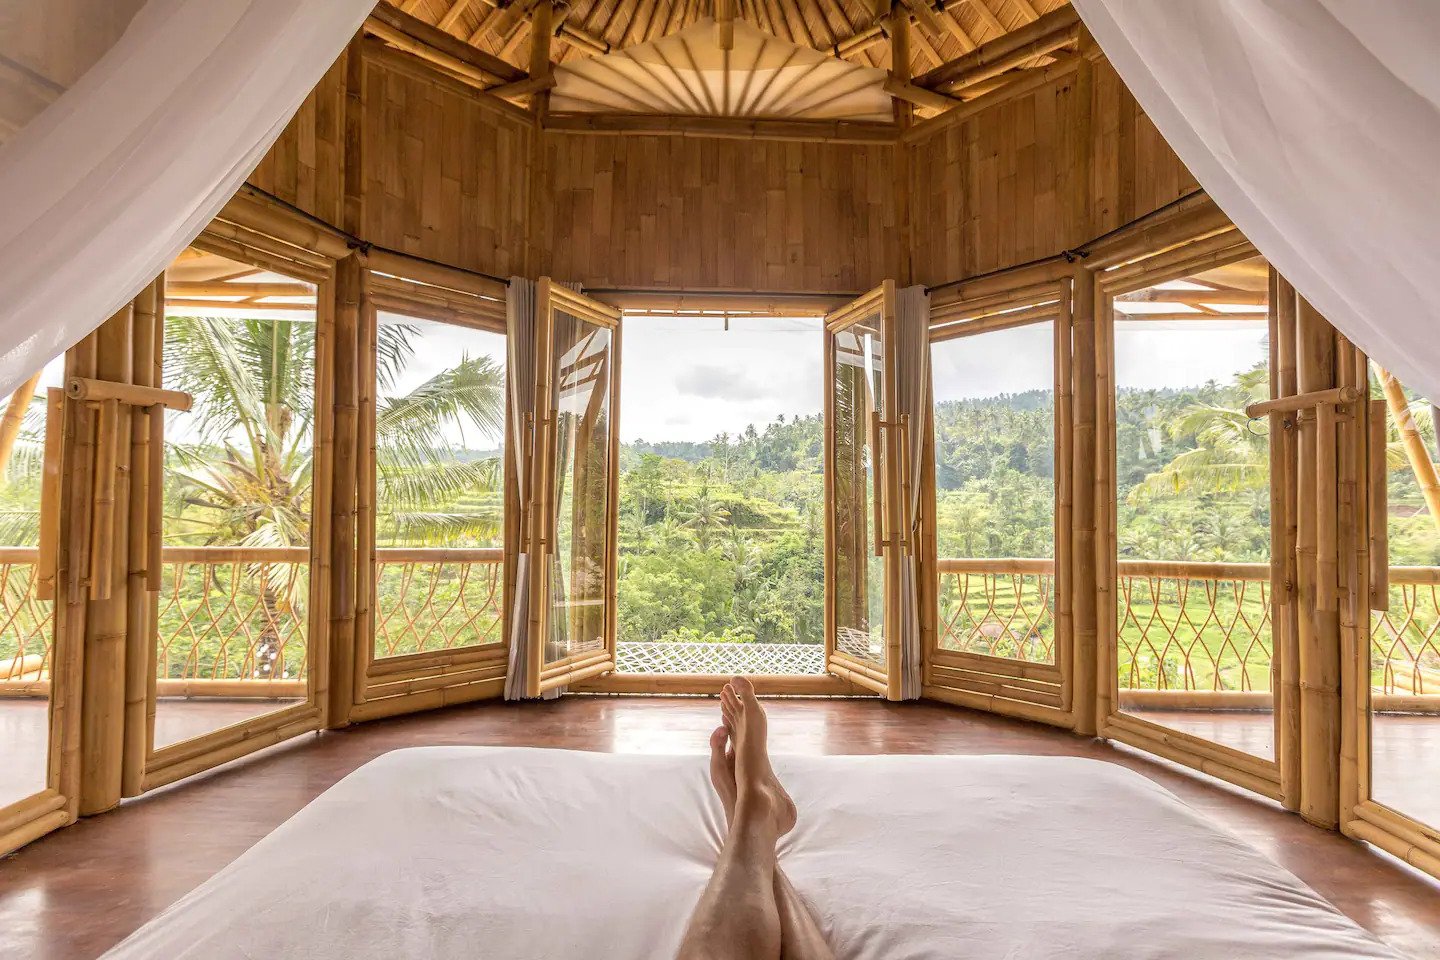 What are the best Airbnb homes in Bali?